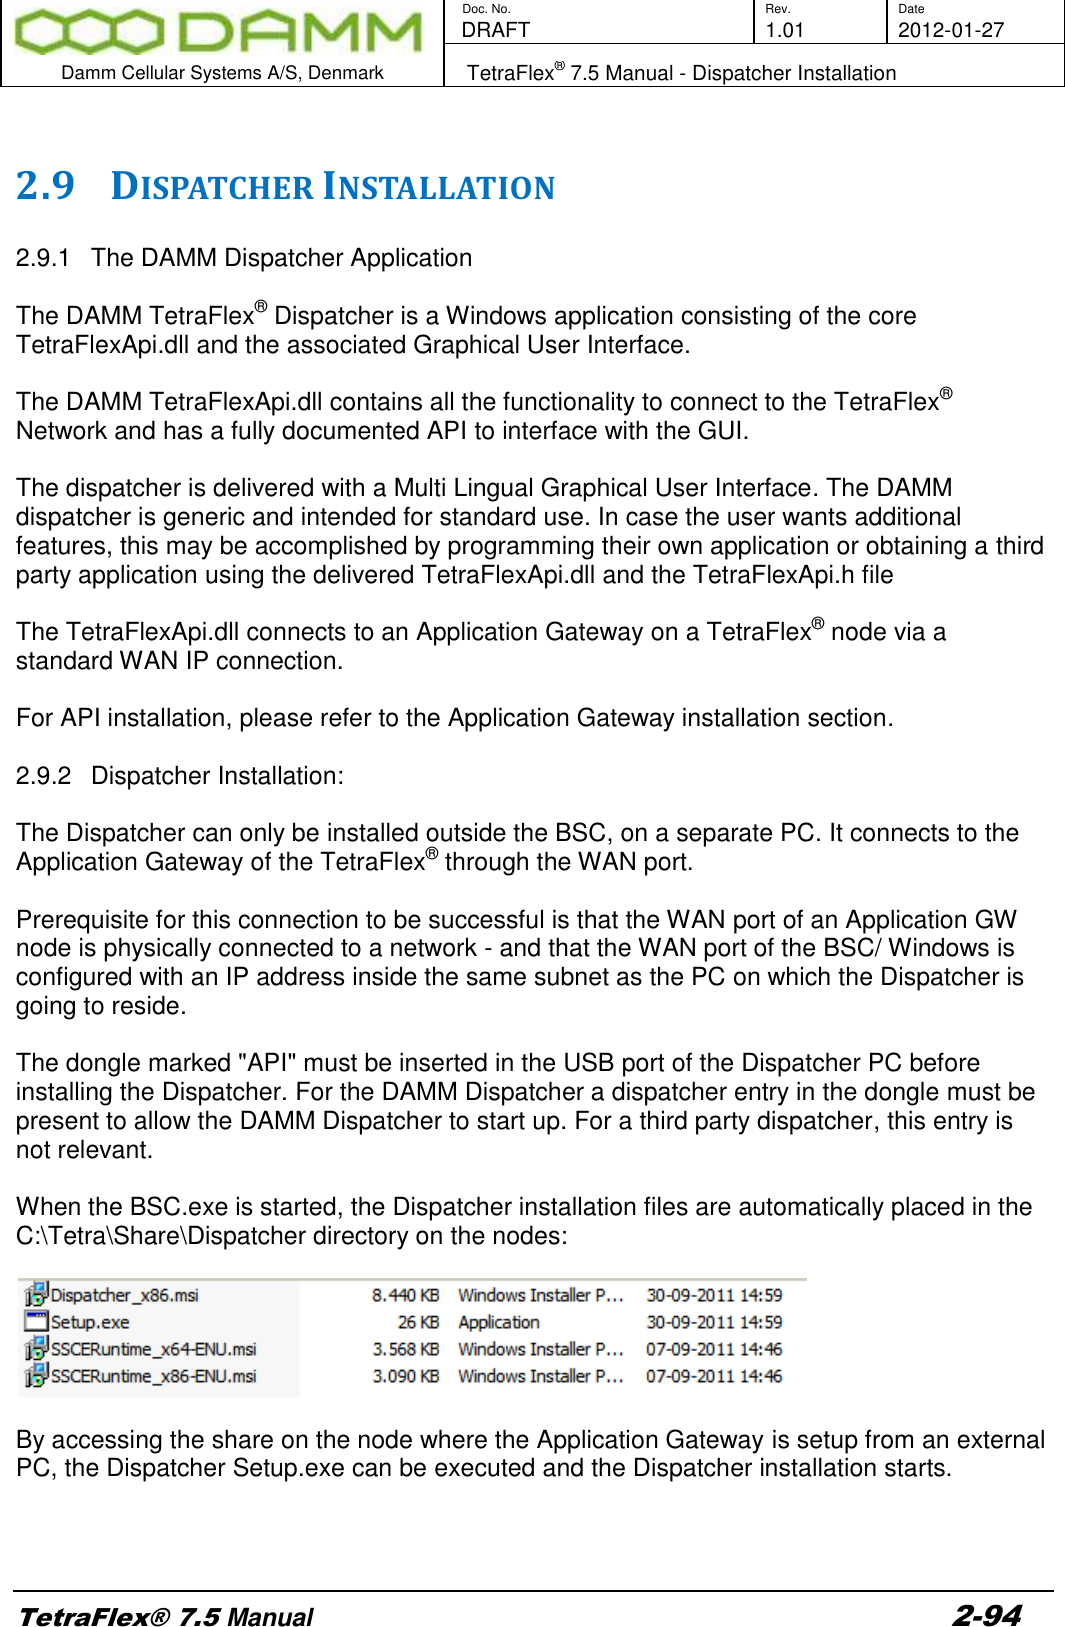        Doc. No. Rev. Date    DRAFT  1.01 2012-01-27  Damm Cellular Systems A/S, Denmark   TetraFlex® 7.5 Manual - Dispatcher Installation  TetraFlex® 7.5 Manual 2-94  2.9 DISPATCHER INSTALLATION  2.9.1  The DAMM Dispatcher Application  The DAMM TetraFlex® Dispatcher is a Windows application consisting of the core TetraFlexApi.dll and the associated Graphical User Interface.  The DAMM TetraFlexApi.dll contains all the functionality to connect to the TetraFlex® Network and has a fully documented API to interface with the GUI.  The dispatcher is delivered with a Multi Lingual Graphical User Interface. The DAMM dispatcher is generic and intended for standard use. In case the user wants additional features, this may be accomplished by programming their own application or obtaining a third party application using the delivered TetraFlexApi.dll and the TetraFlexApi.h file  The TetraFlexApi.dll connects to an Application Gateway on a TetraFlex® node via a standard WAN IP connection.  For API installation, please refer to the Application Gateway installation section.   2.9.2  Dispatcher Installation:   The Dispatcher can only be installed outside the BSC, on a separate PC. It connects to the Application Gateway of the TetraFlex® through the WAN port.    Prerequisite for this connection to be successful is that the WAN port of an Application GW node is physically connected to a network - and that the WAN port of the BSC/ Windows is configured with an IP address inside the same subnet as the PC on which the Dispatcher is going to reside.  The dongle marked &quot;API&quot; must be inserted in the USB port of the Dispatcher PC before installing the Dispatcher. For the DAMM Dispatcher a dispatcher entry in the dongle must be present to allow the DAMM Dispatcher to start up. For a third party dispatcher, this entry is not relevant.   When the BSC.exe is started, the Dispatcher installation files are automatically placed in the C:\Tetra\Share\Dispatcher directory on the nodes:    By accessing the share on the node where the Application Gateway is setup from an external PC, the Dispatcher Setup.exe can be executed and the Dispatcher installation starts.    